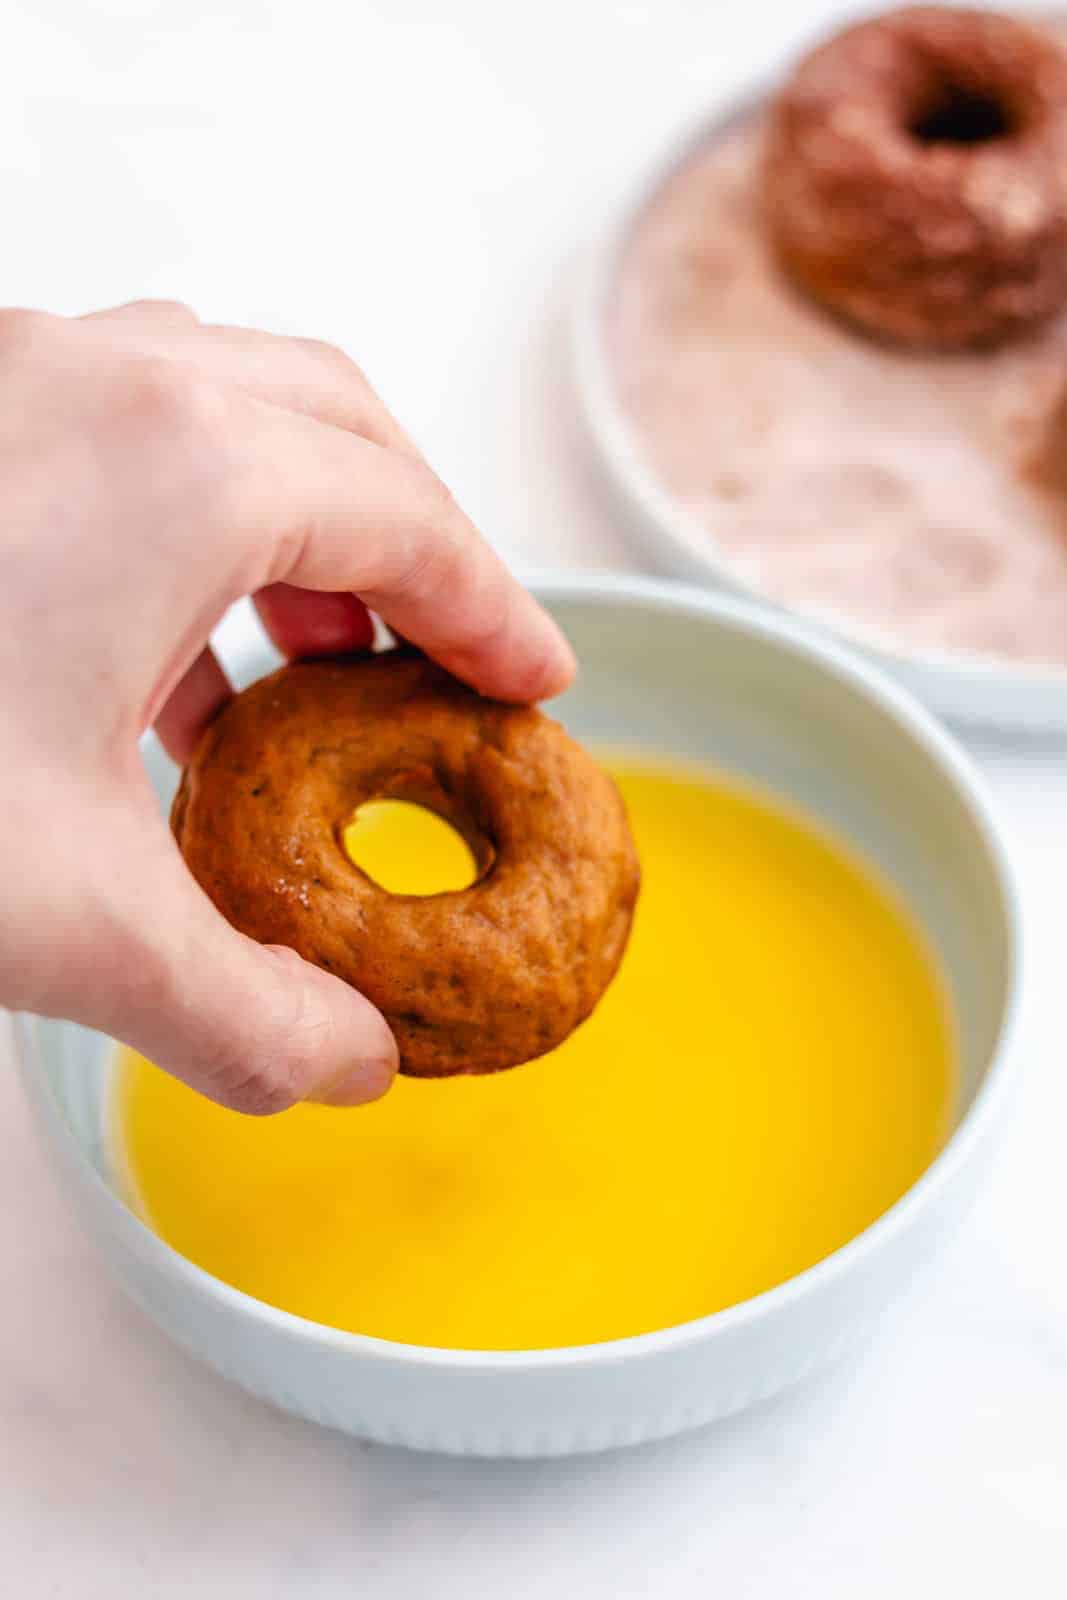 Hand dipping donuts in melted butter.